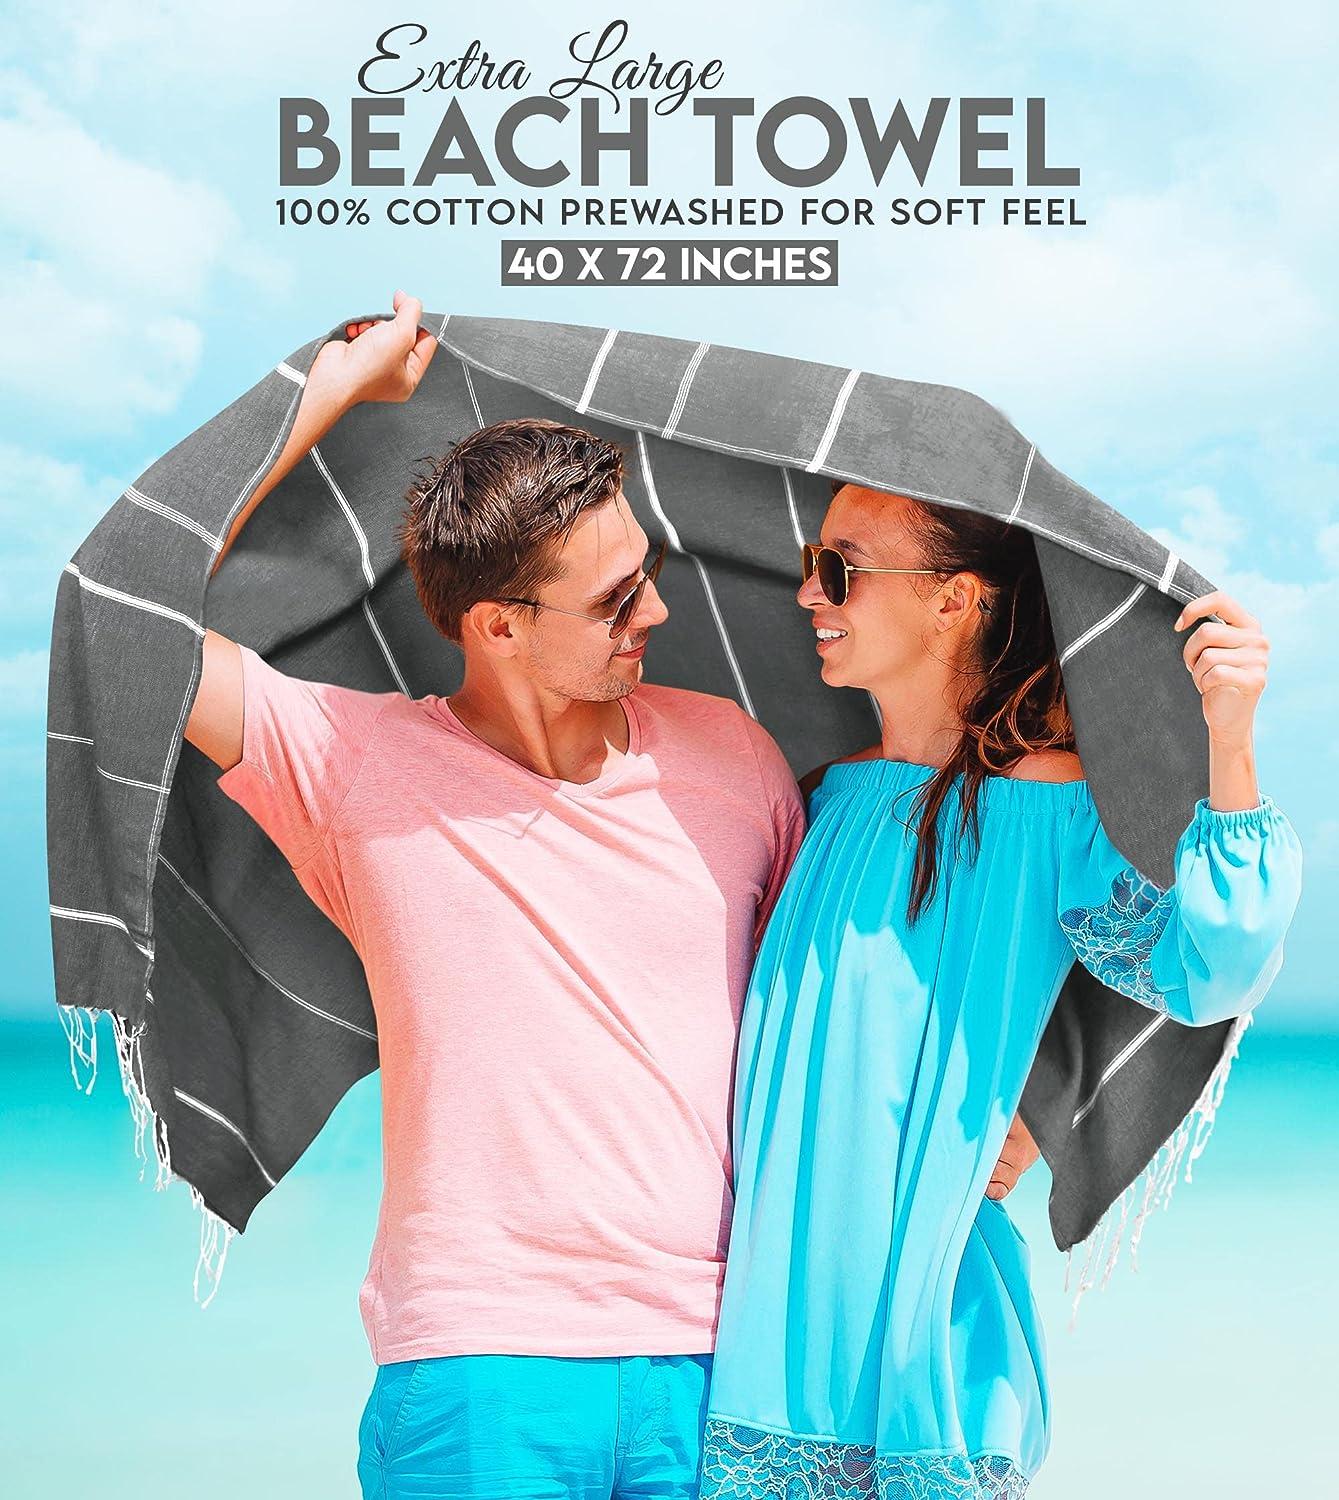 Utopia Towels Pack of 2 Turkish Beach Towel (40x72 Inches